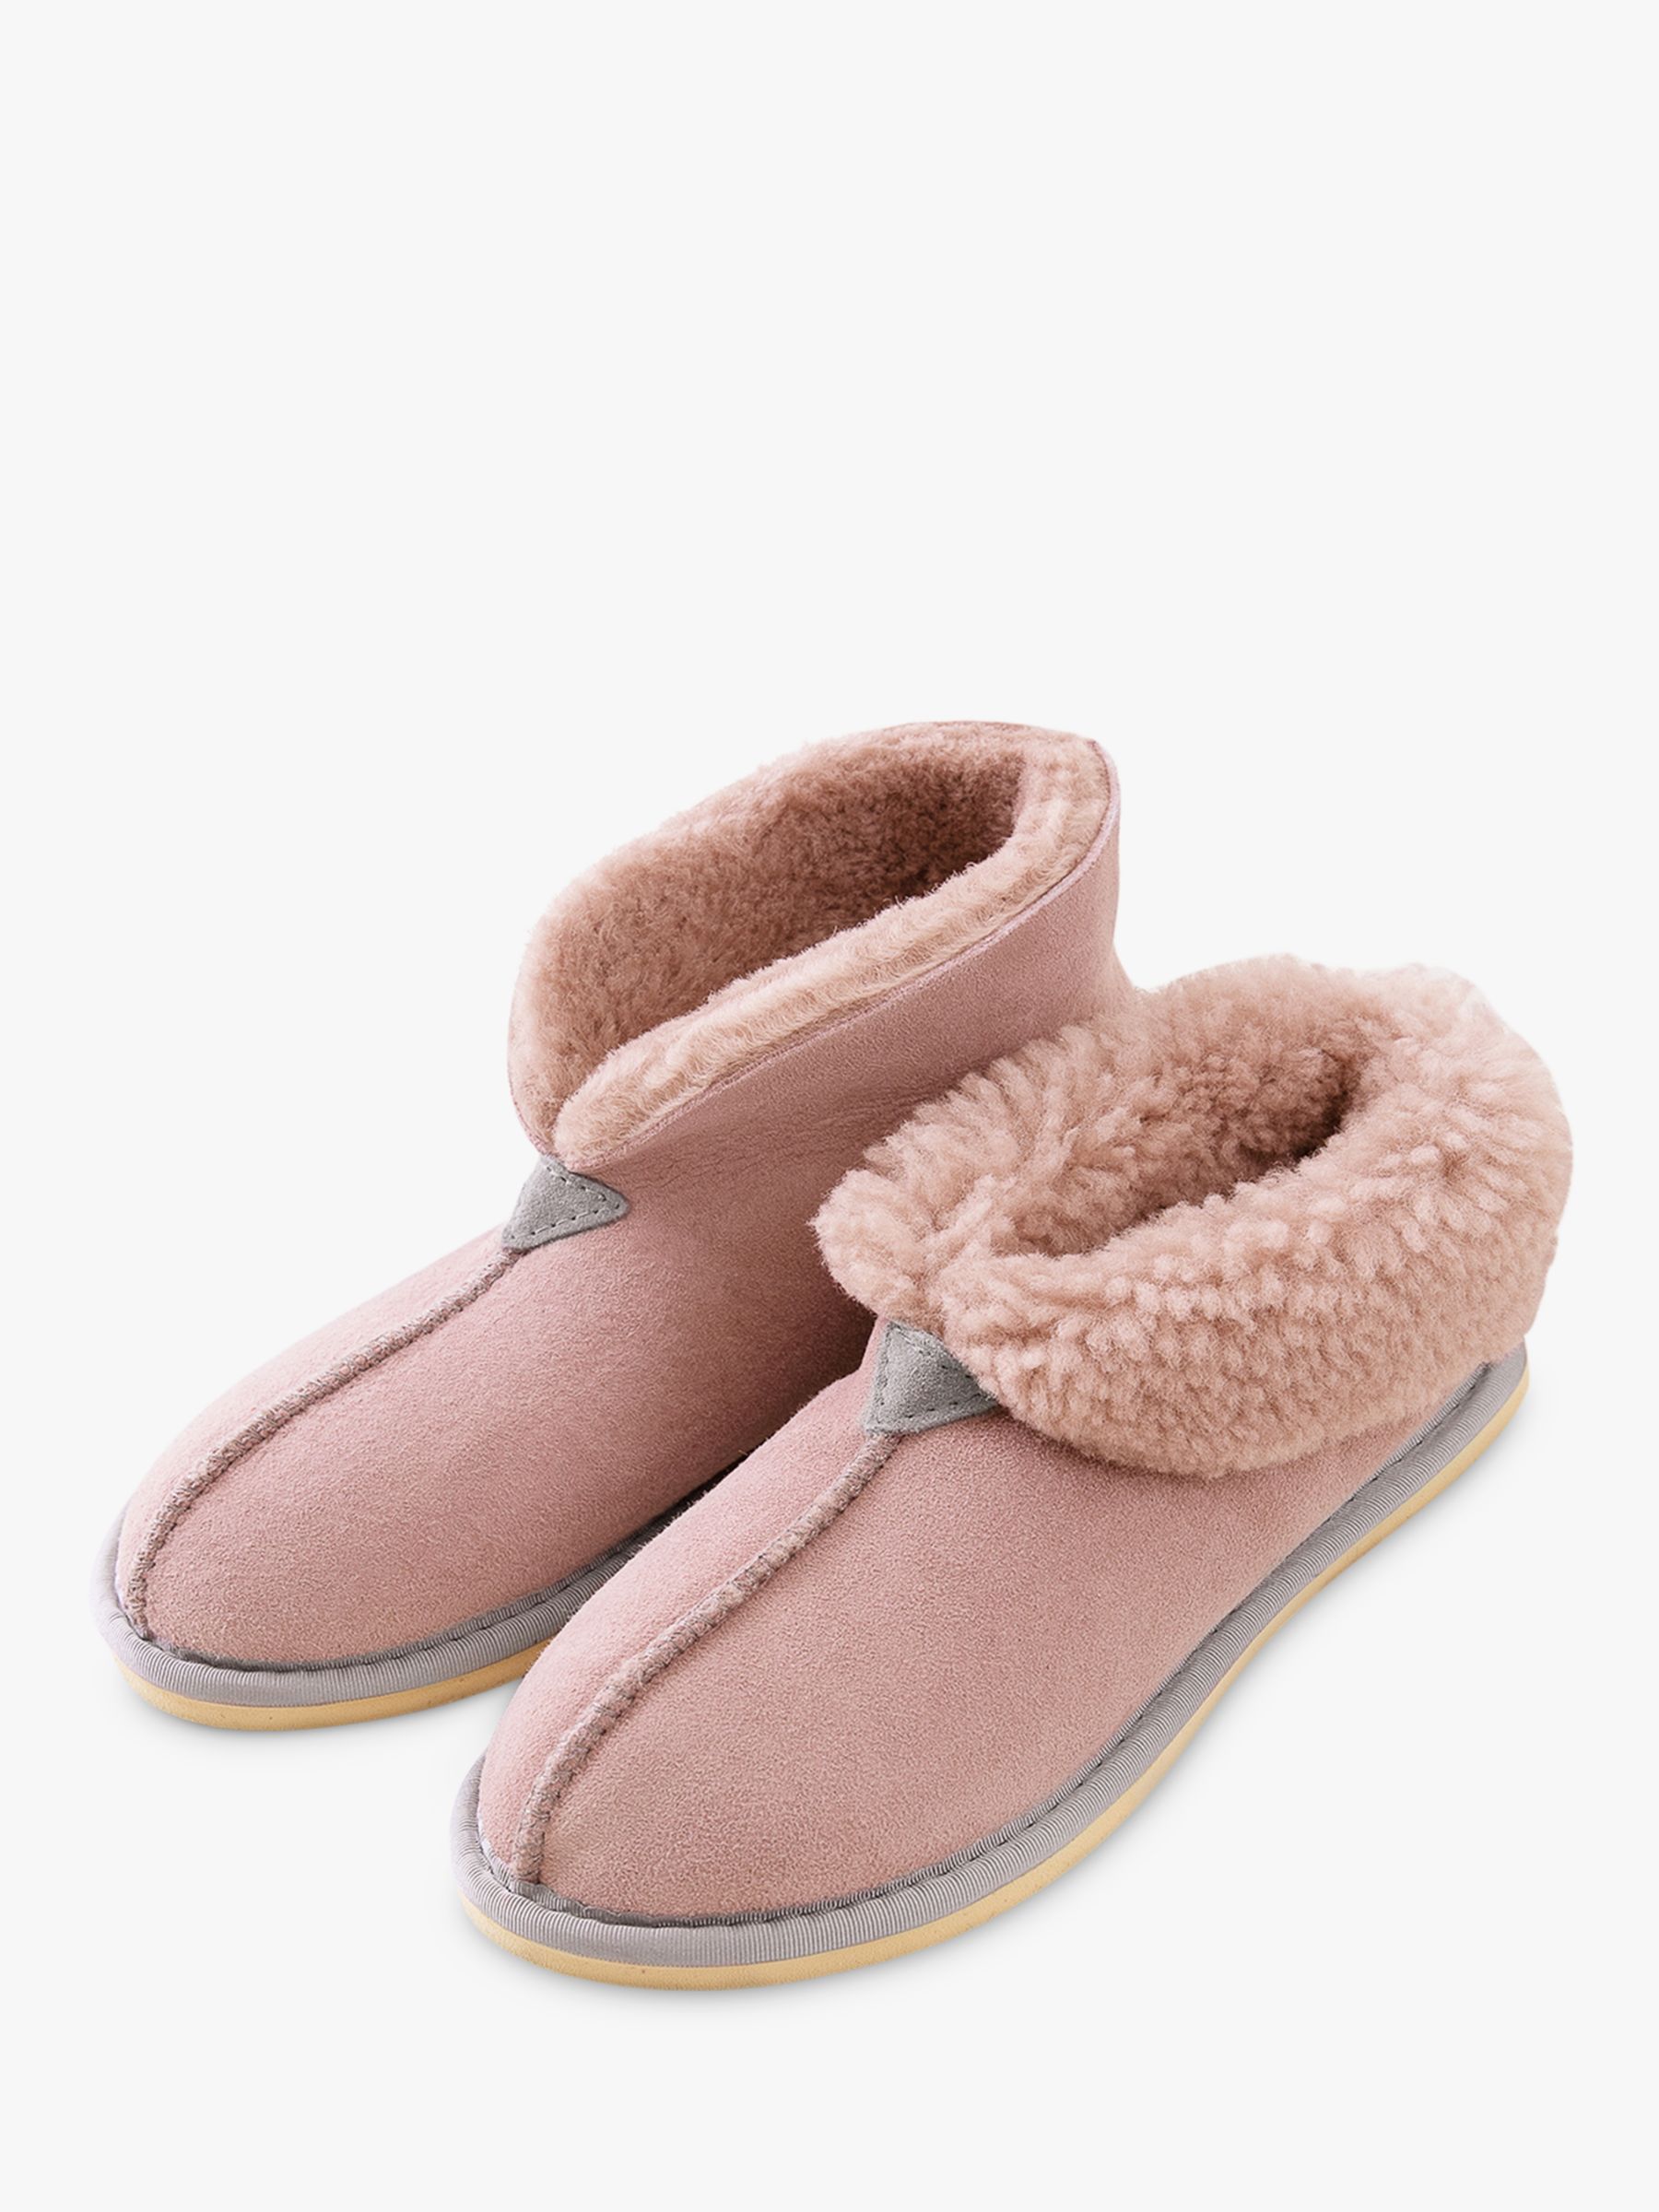 Buy Celtic & Co. Sheepskin Soft Sole Bootee Slippers Online at johnlewis.com